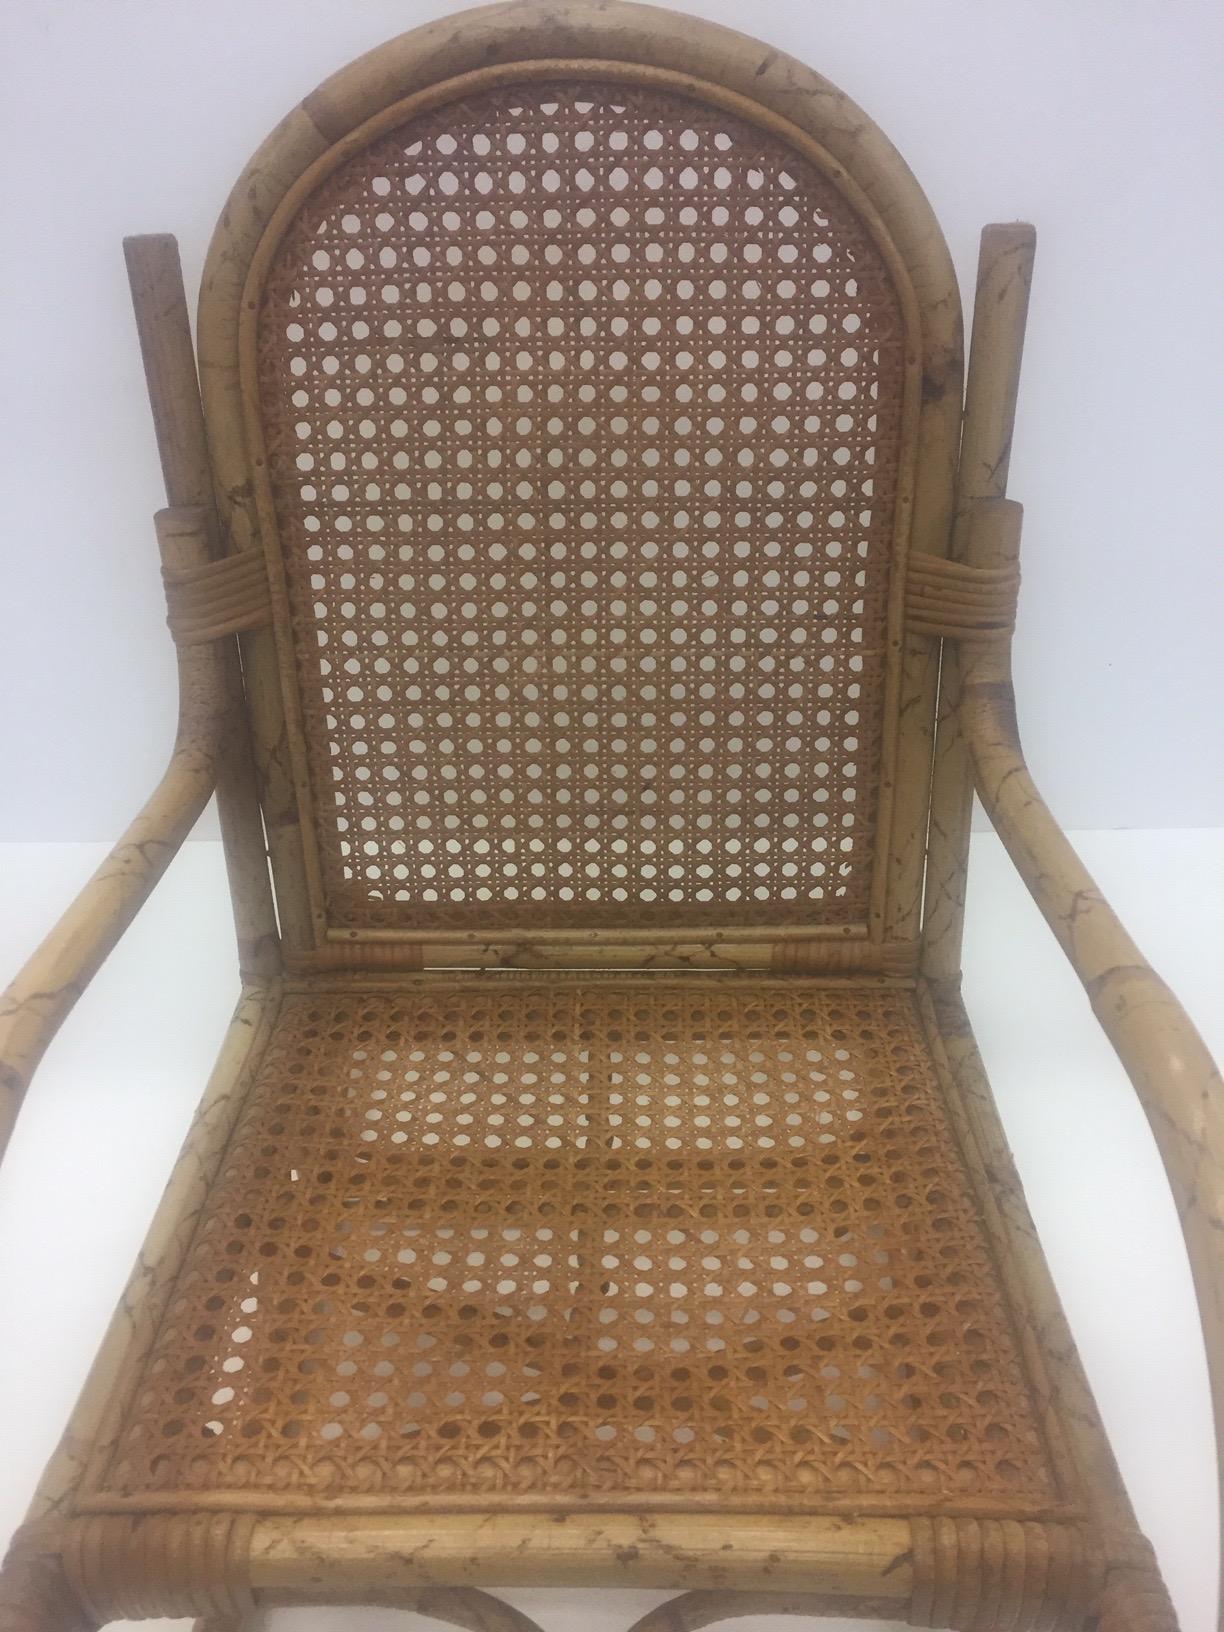 Darling Rattan Child's Rocking Chair In Excellent Condition For Sale In Hopewell, NJ